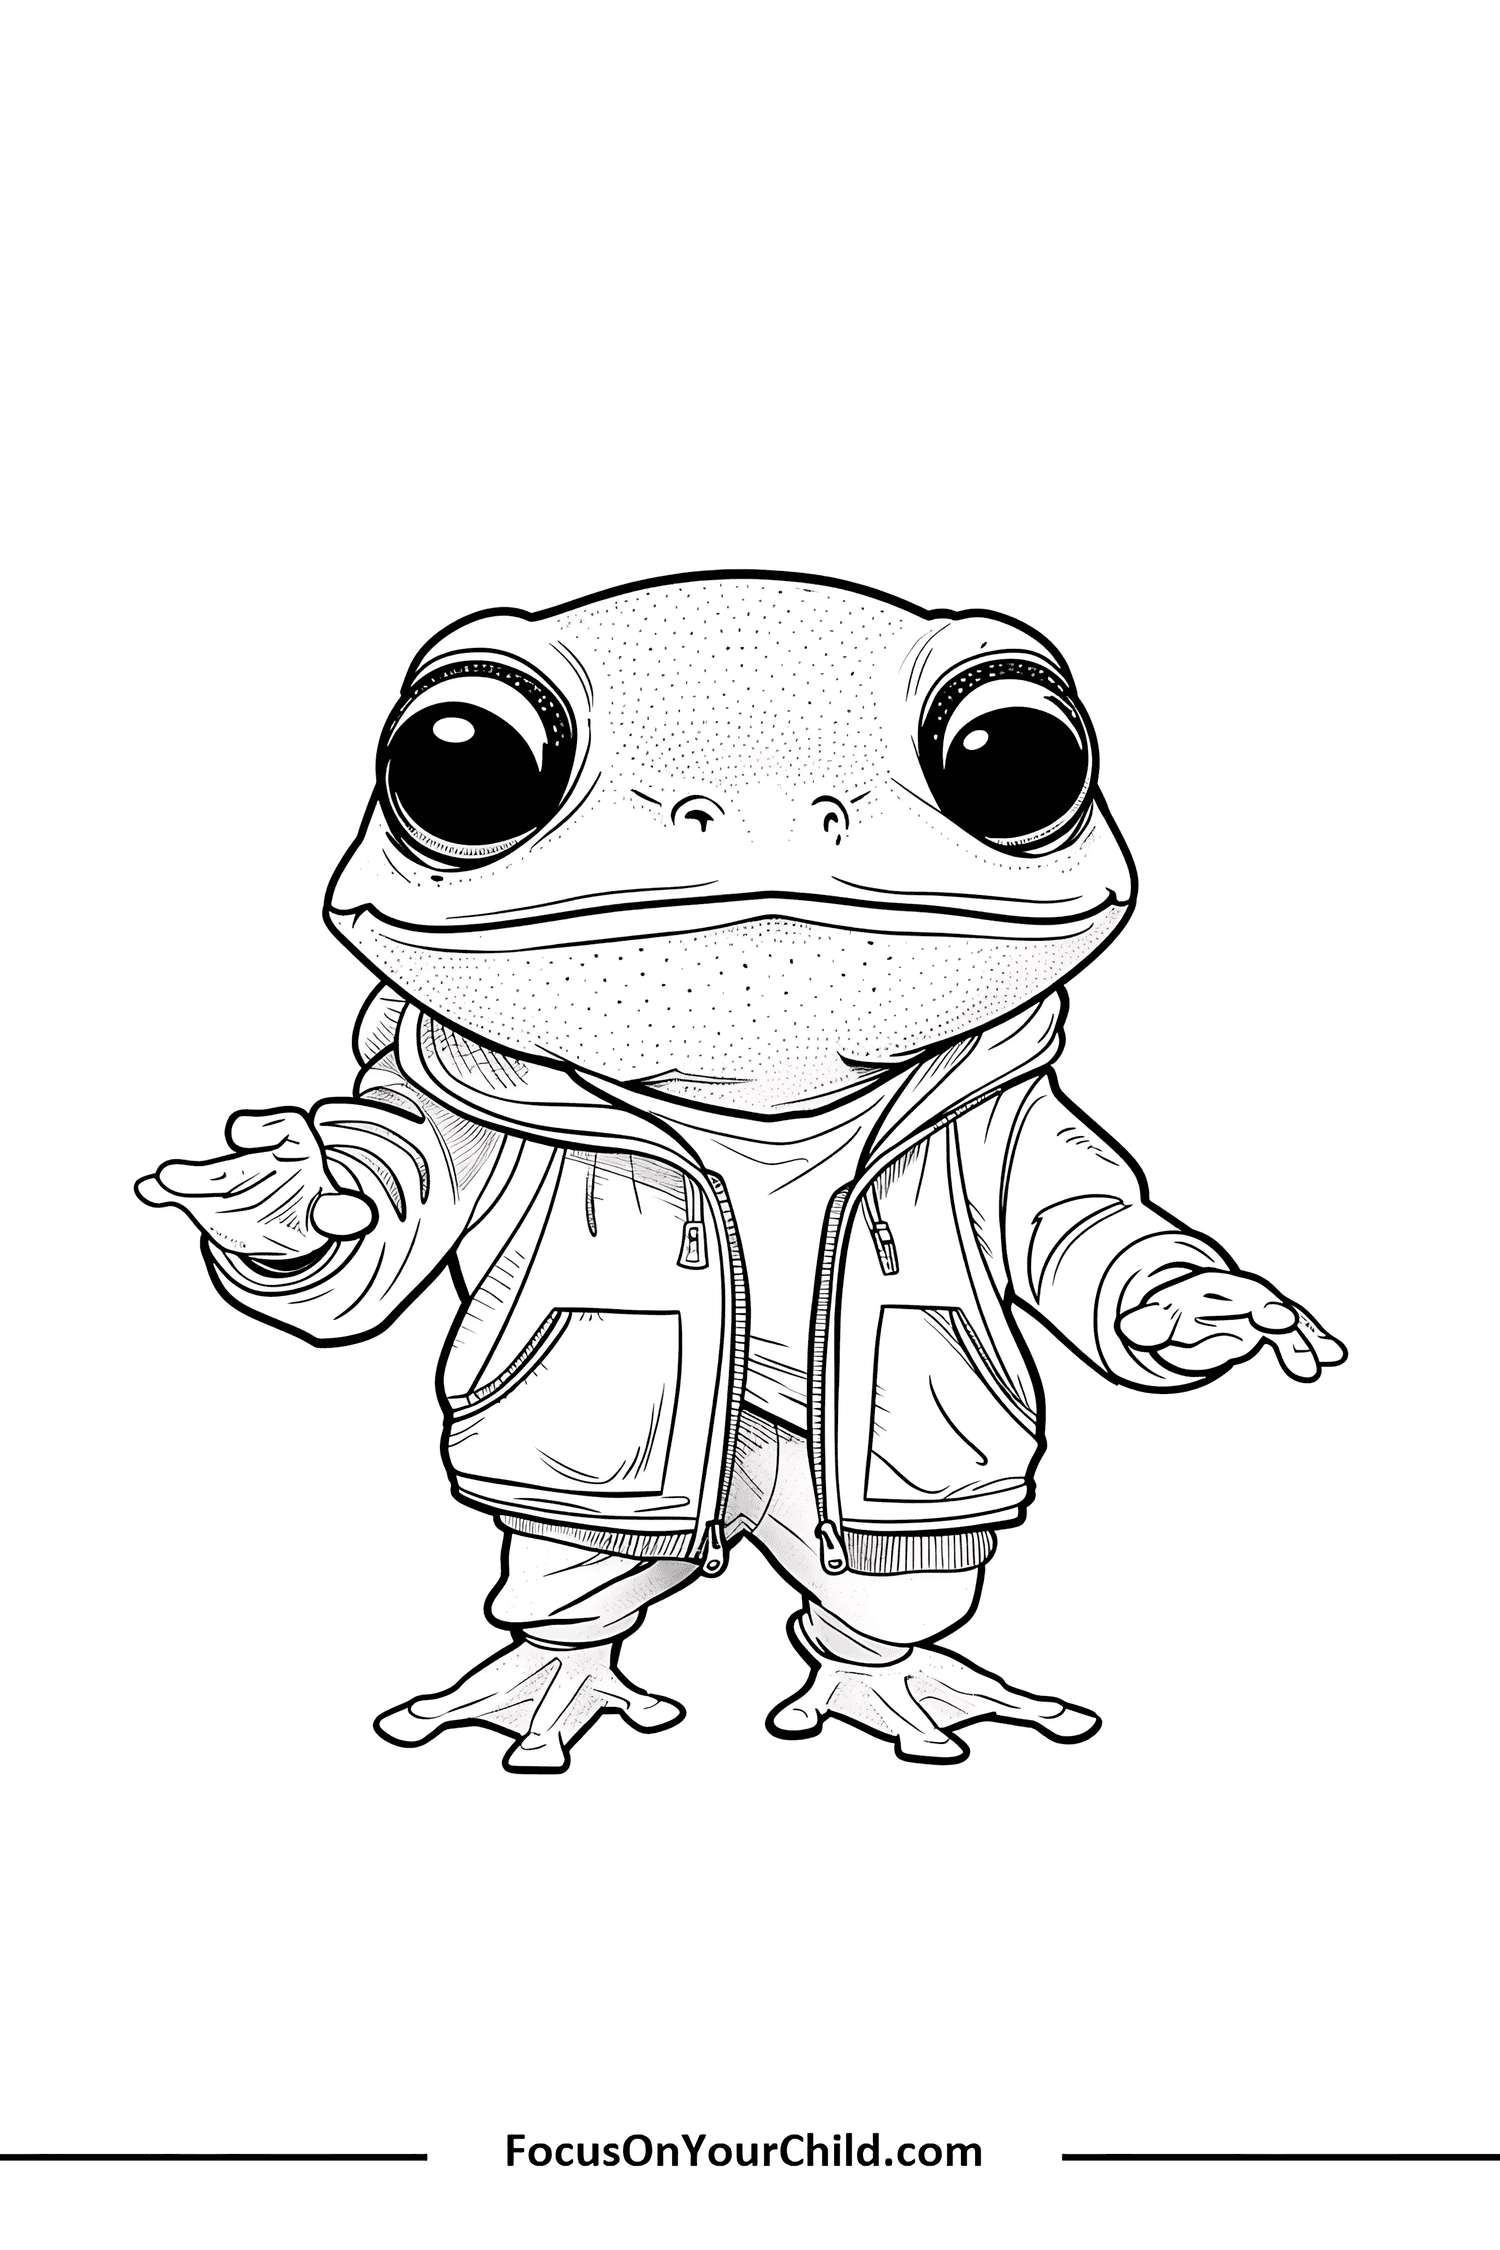 Detailed anthropomorphic frog character in casual human clothing, standing against a white background.